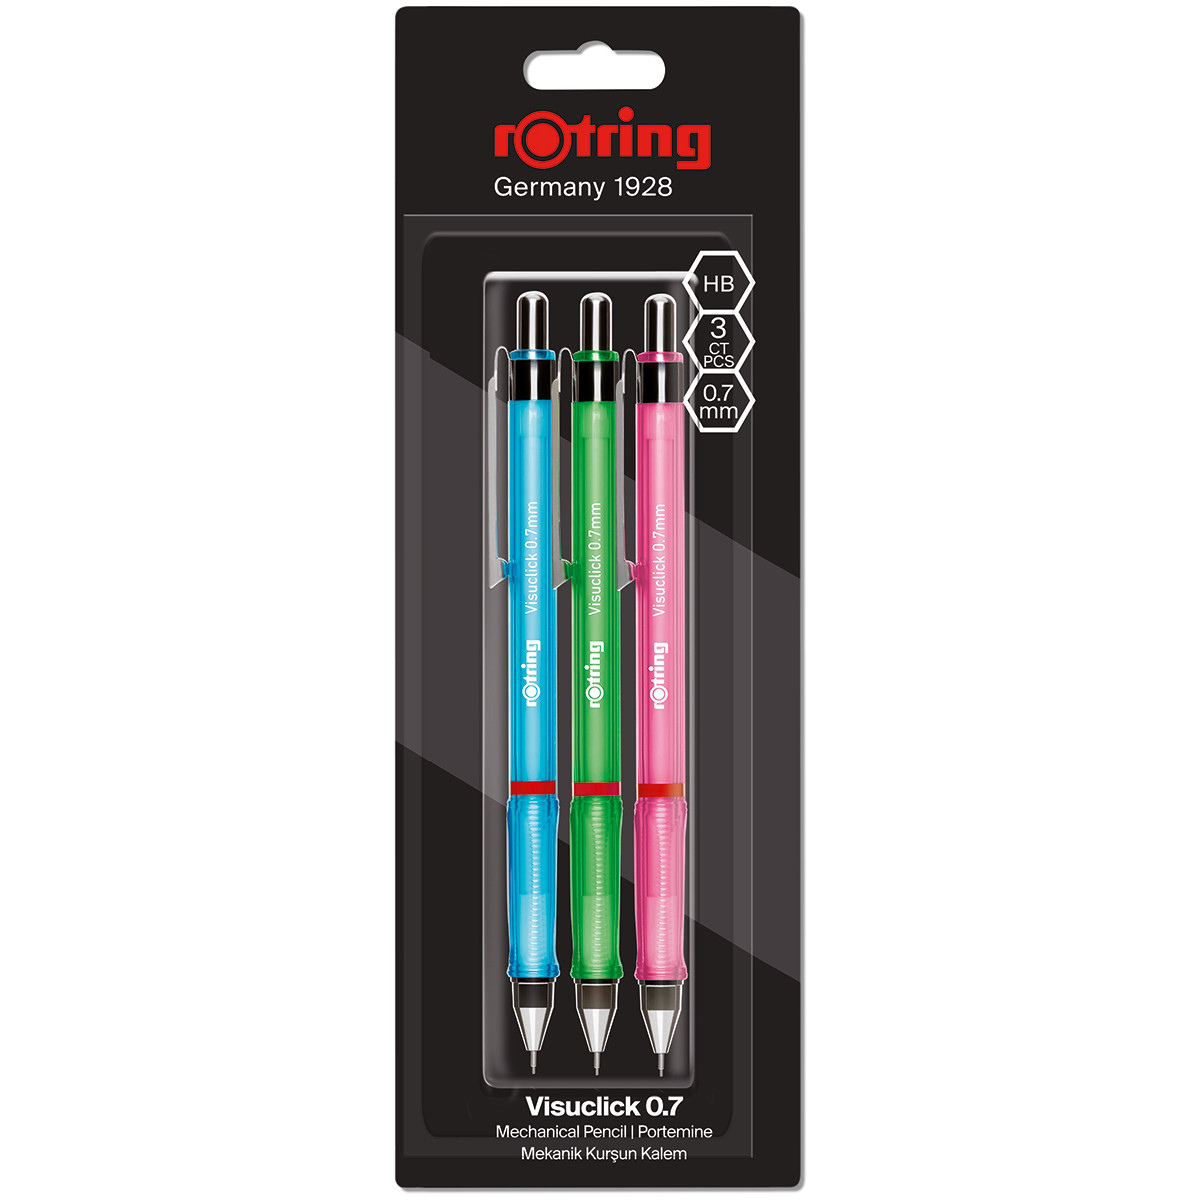 Rotoring Visuclick Mechanical Pencil - 0.7mm - Assorted Colours (Blister of 3)